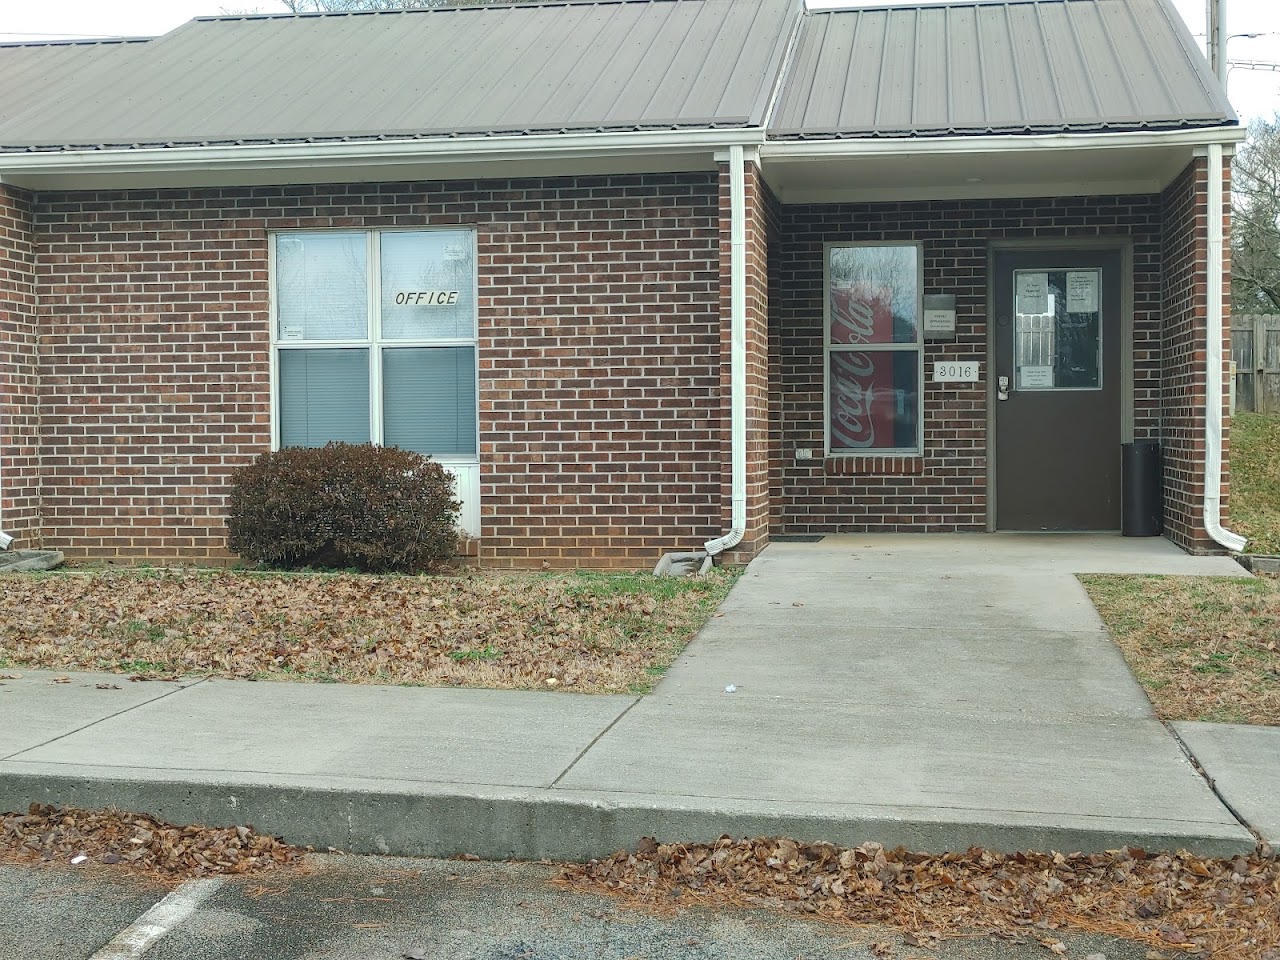 Photo of JEFFERSON PLACE APTS. Affordable housing located at 3016 JEFFERSON PL WHITE PINE, TN 37890